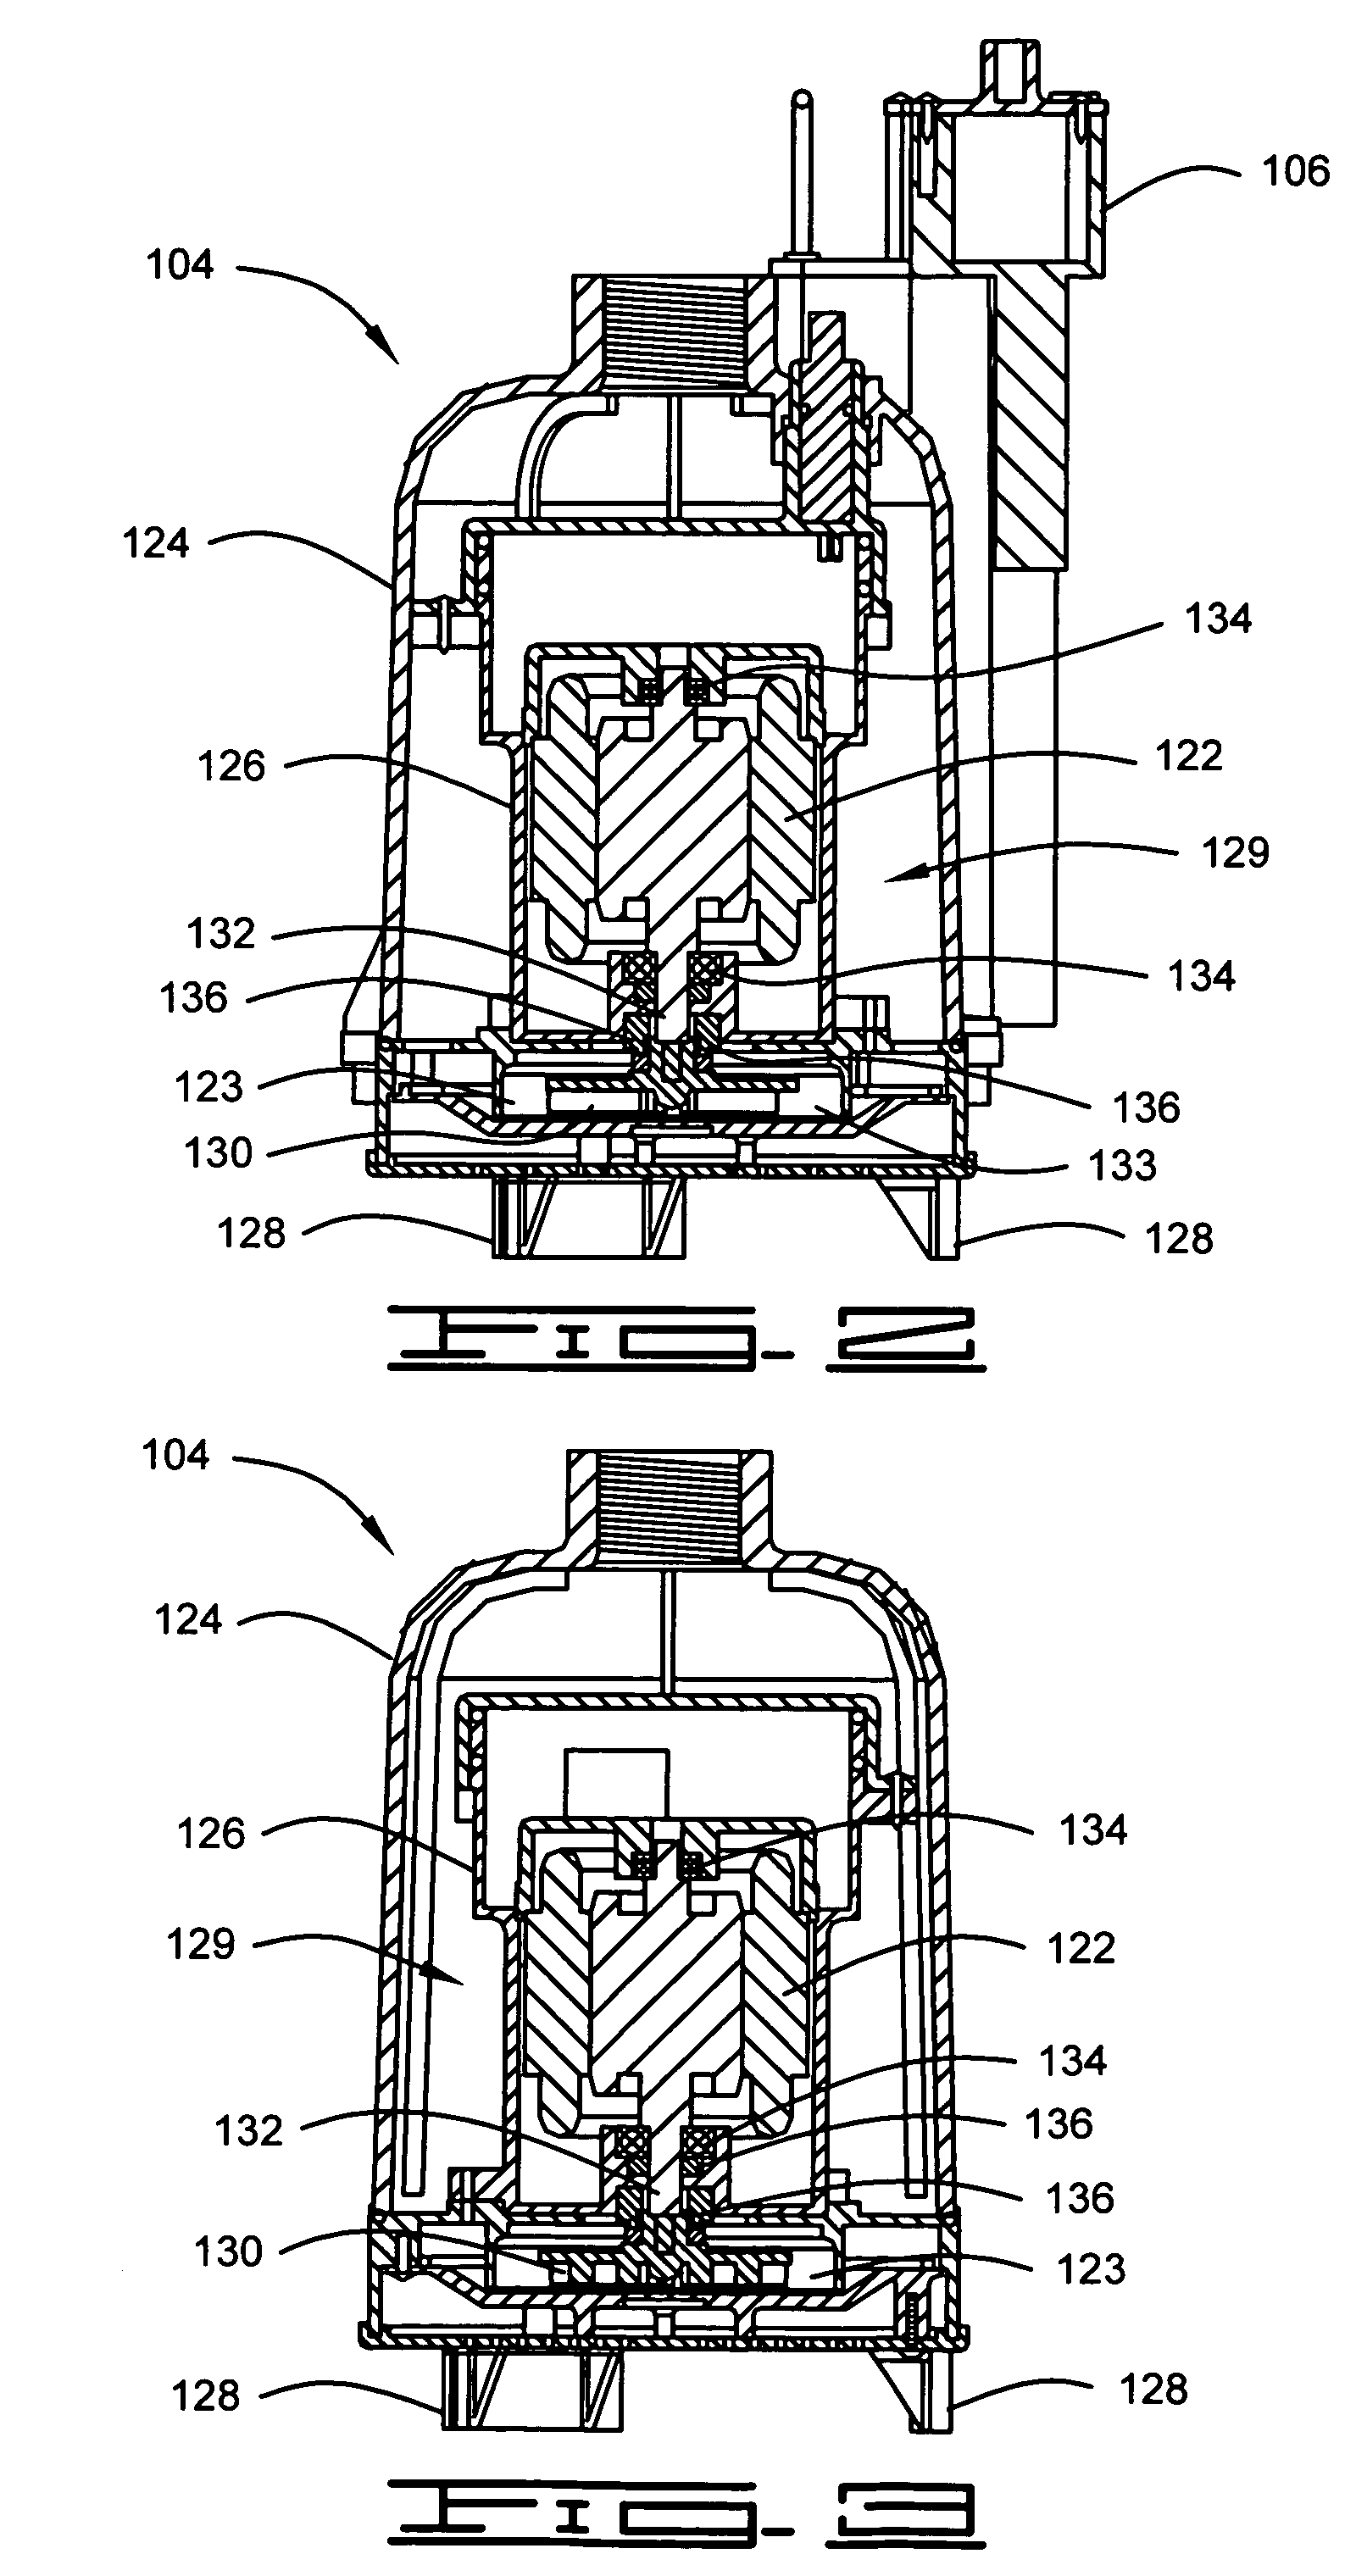 Automatic liquid collection and disposal assembly